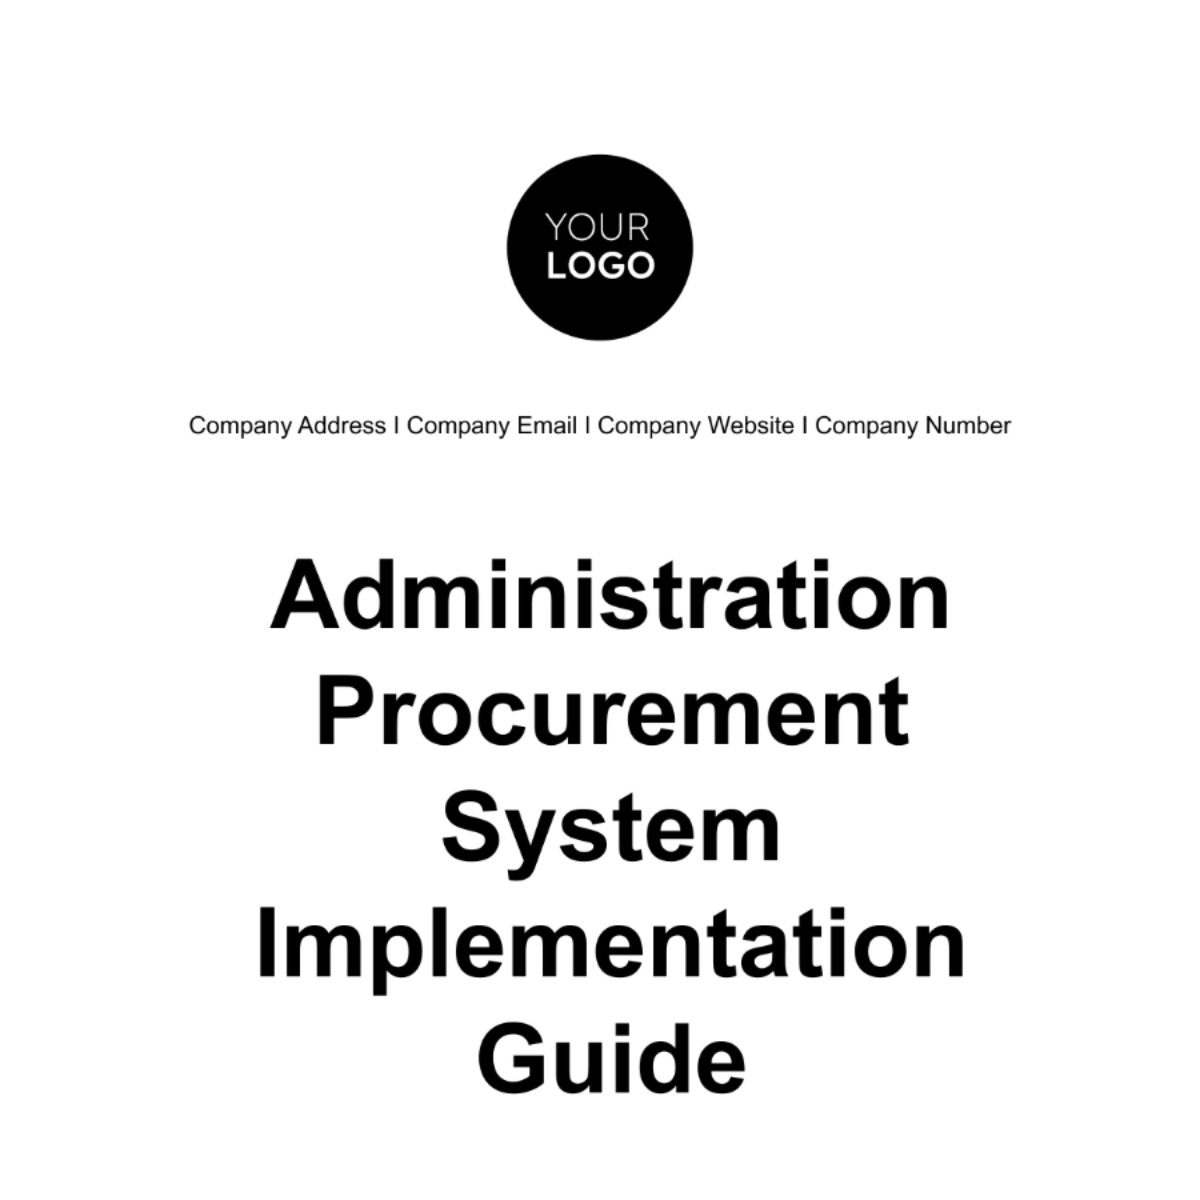 Administration Procurement System Implementation Guide Template